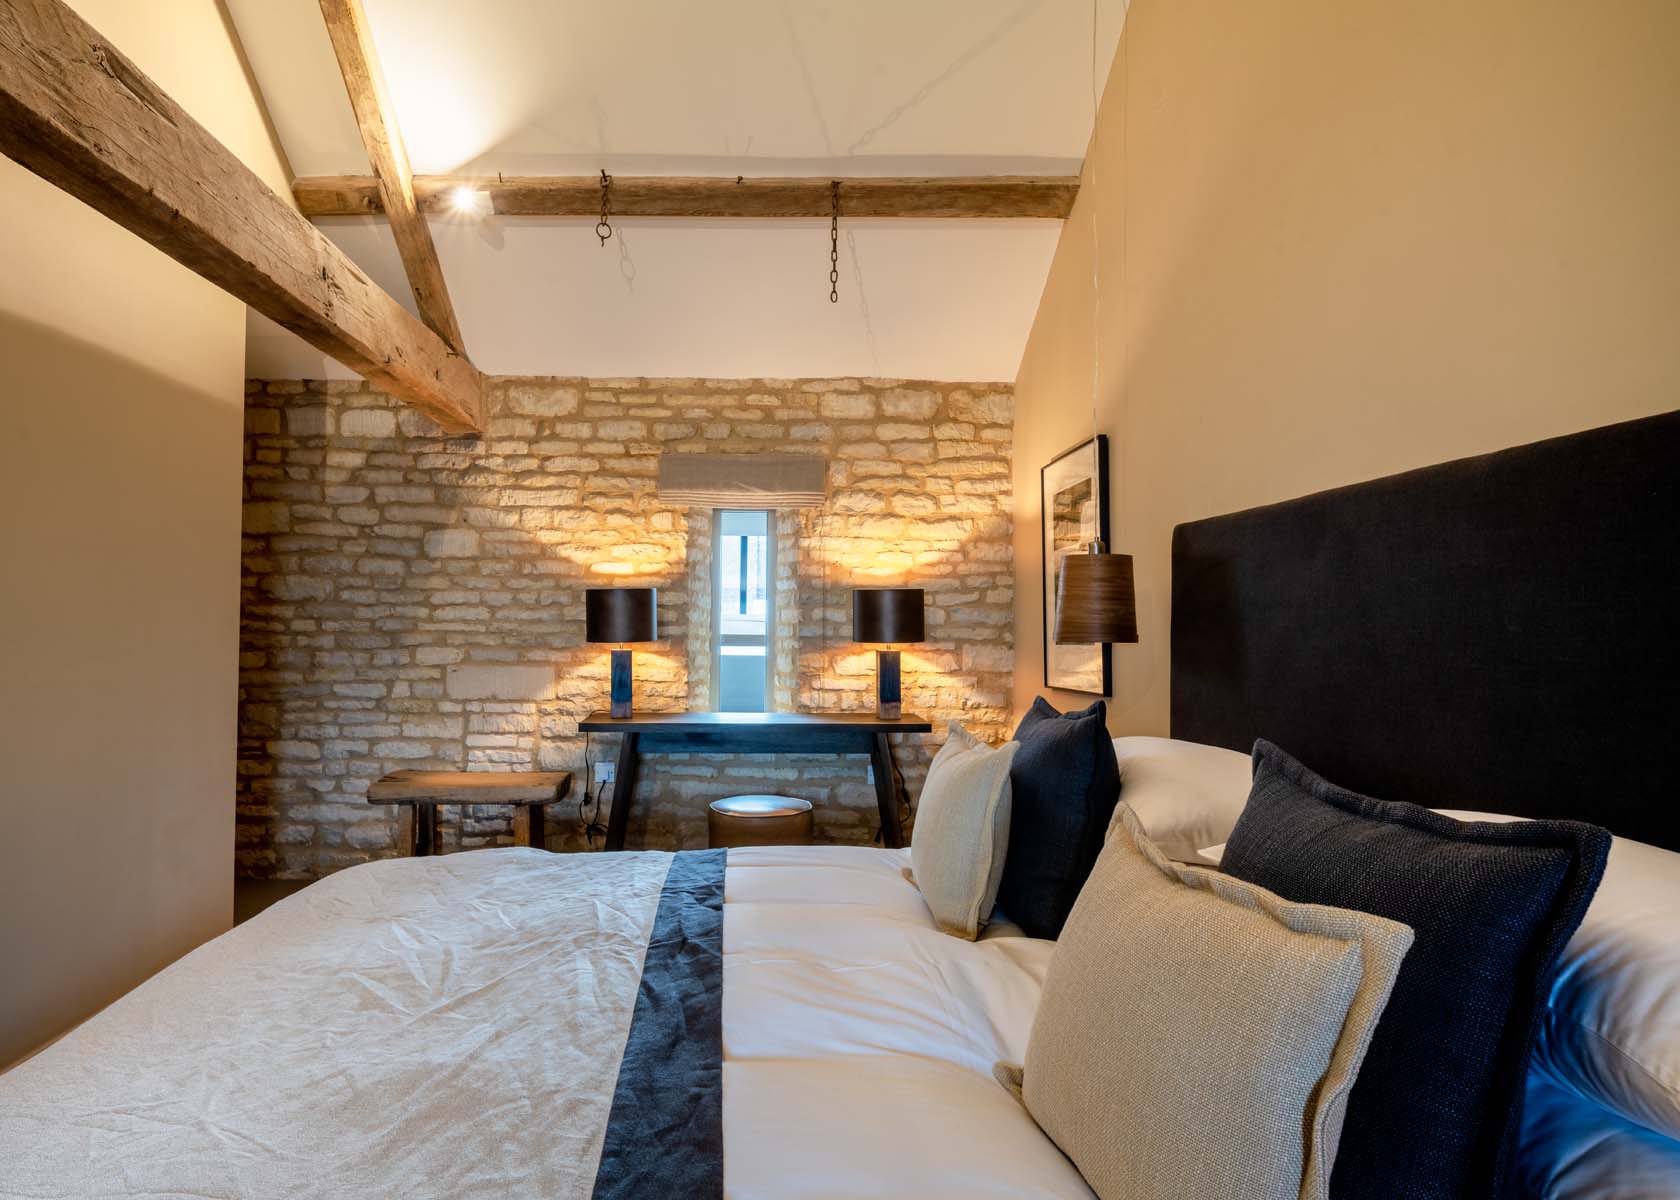 Bedroom with exposed stone walls and exposed wooden beams